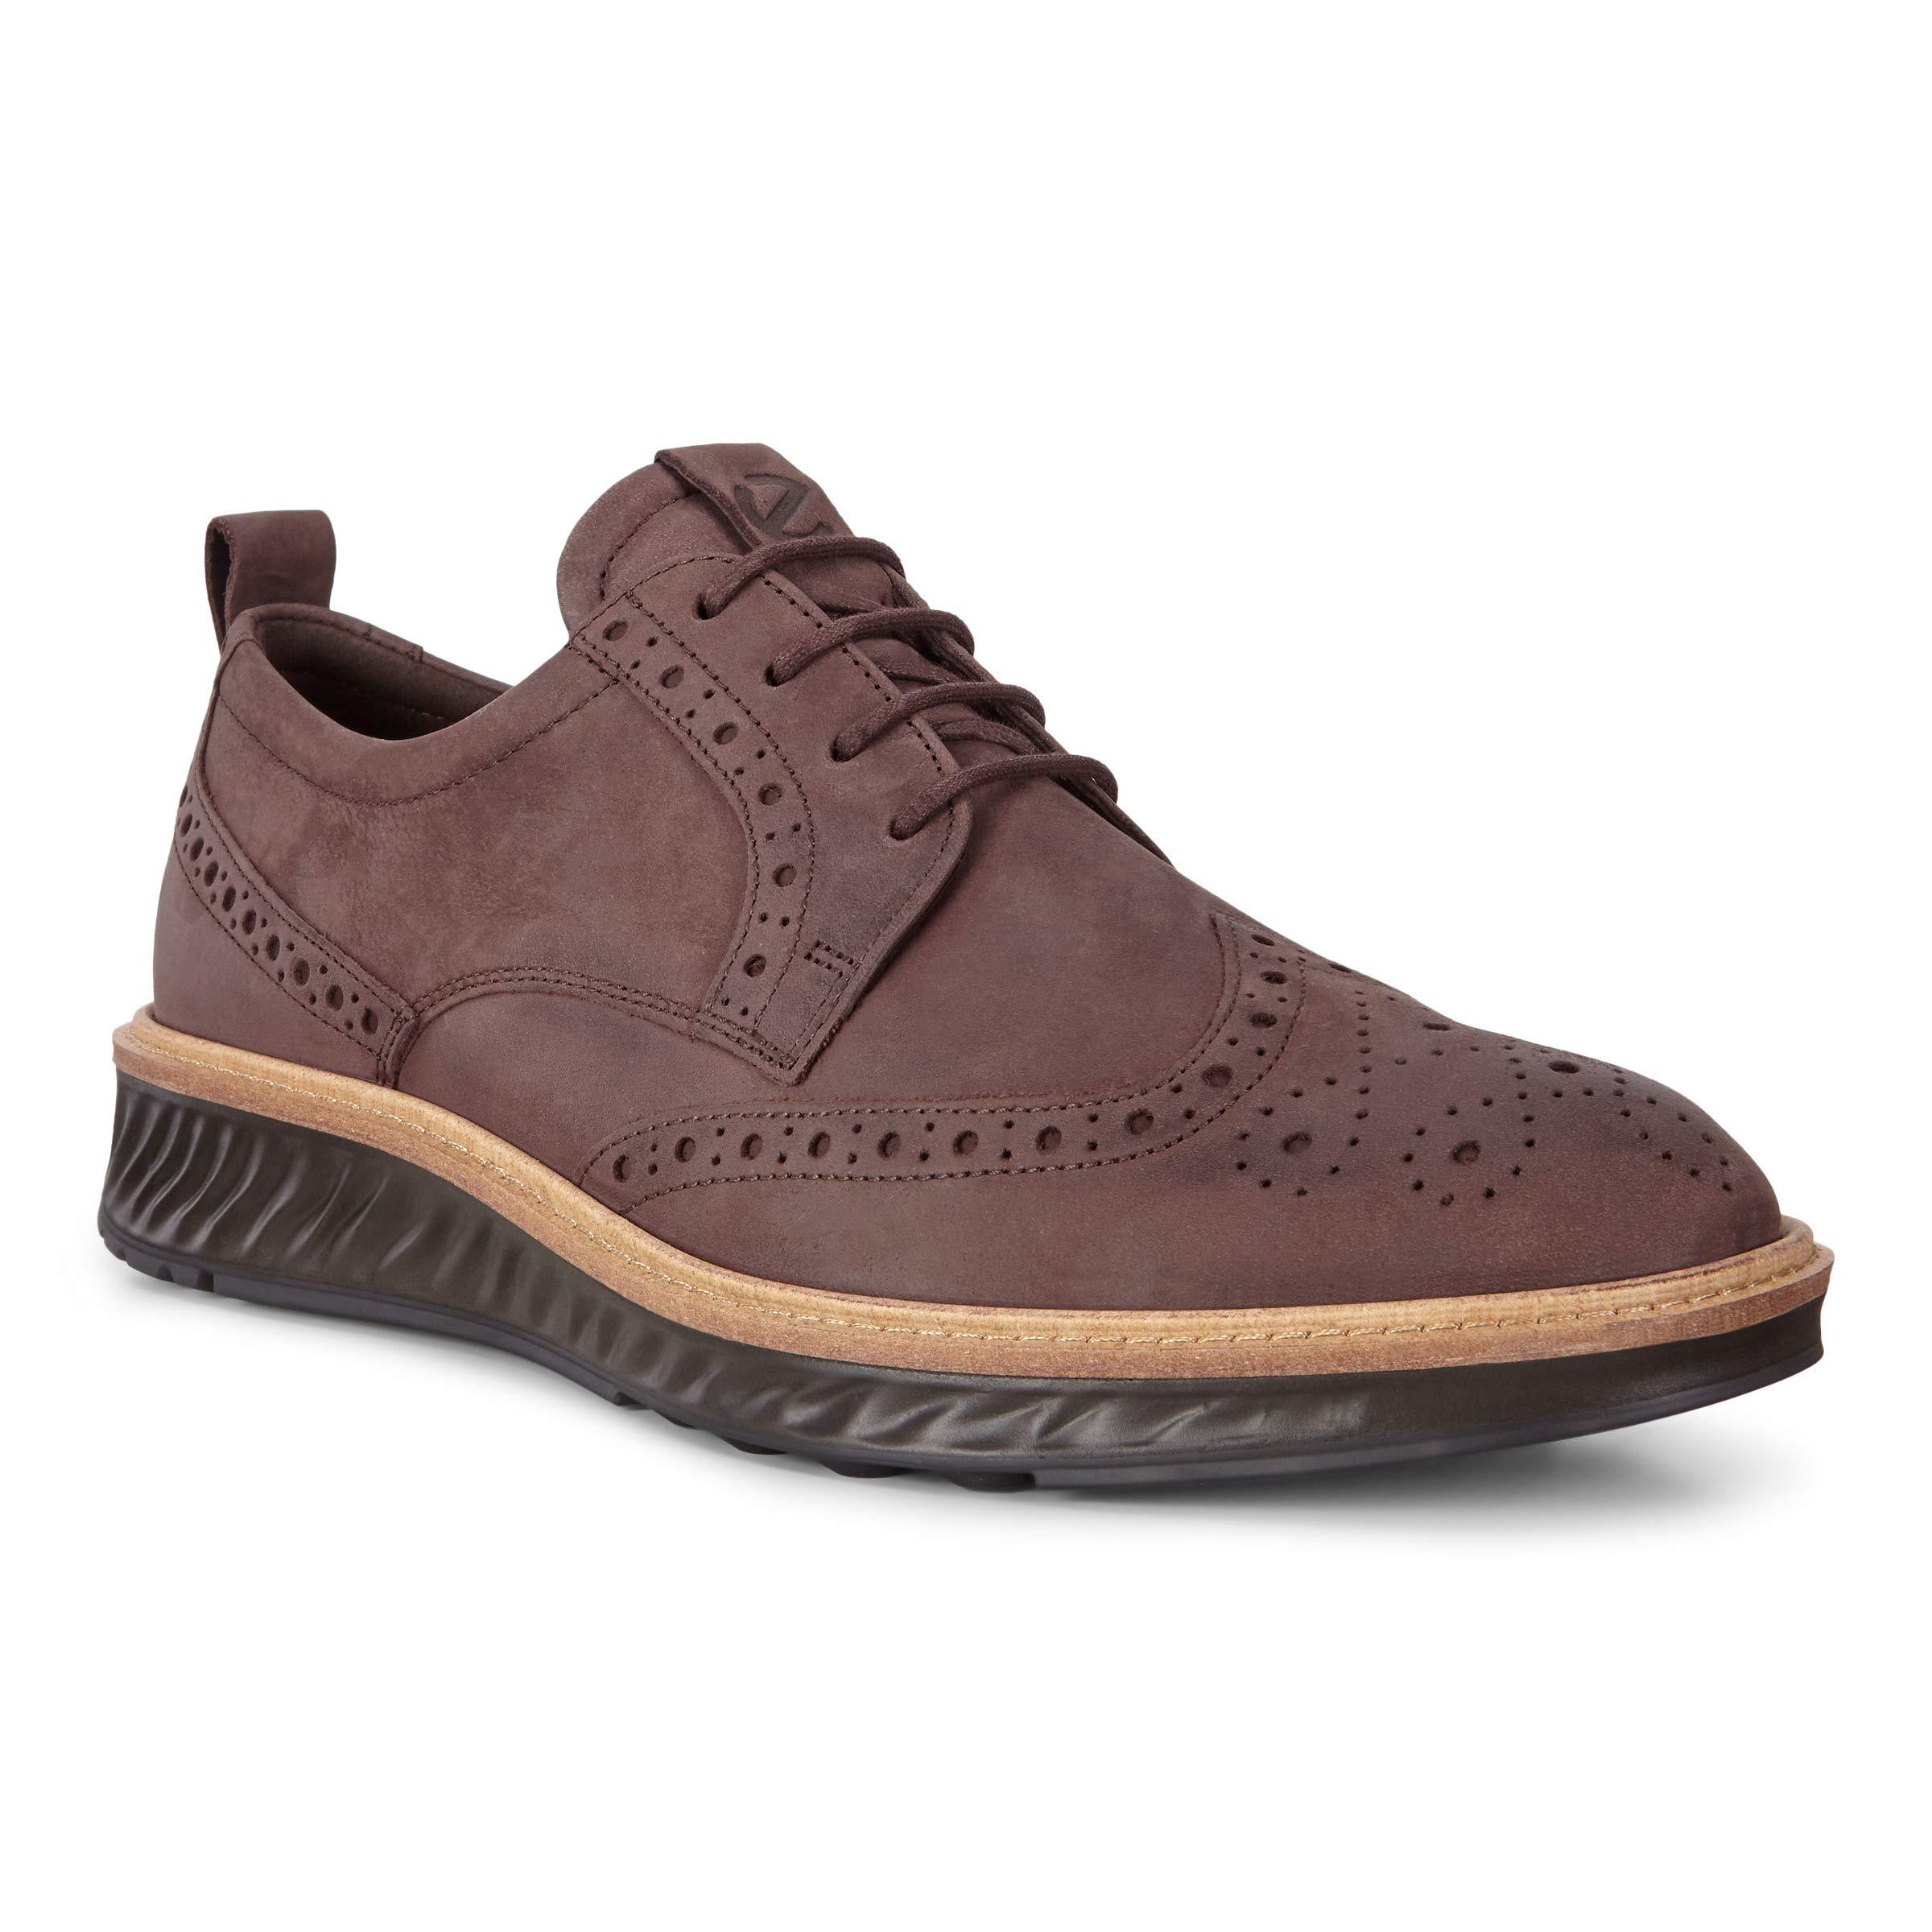 Ecco St1 Hybrid Brogue Oxford in Brown for Men - Lyst